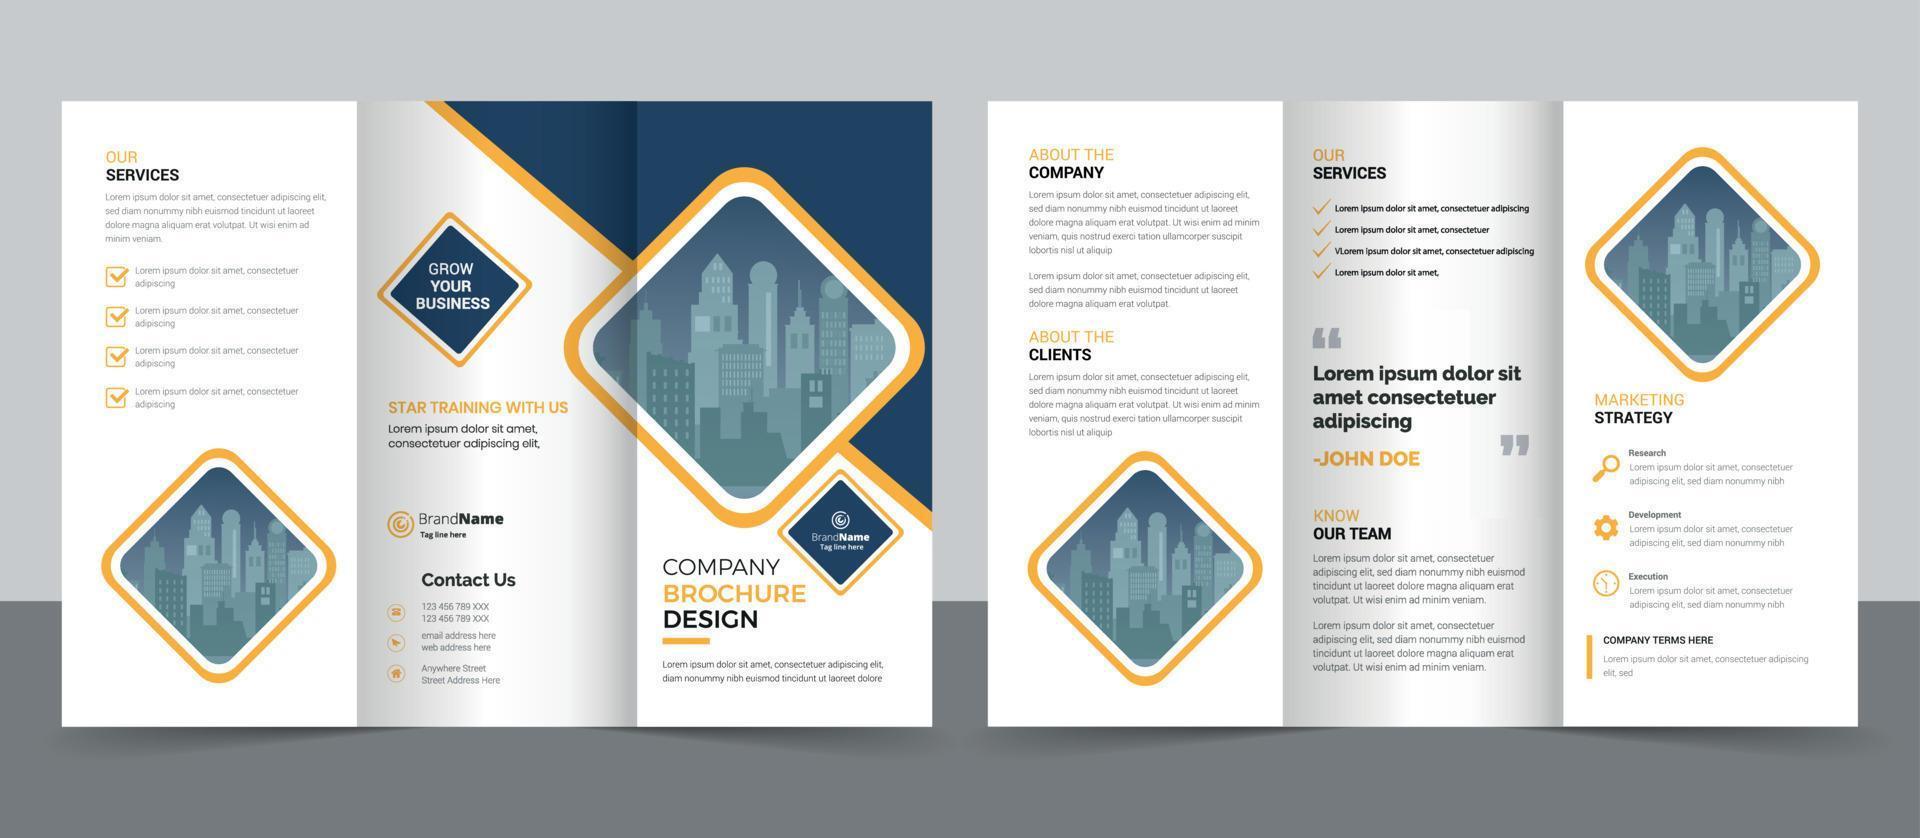 Trifold Brochure Design Template for Your Company, Corporate, Business, Advertising, Marketing, Agency, and Internet Business vector